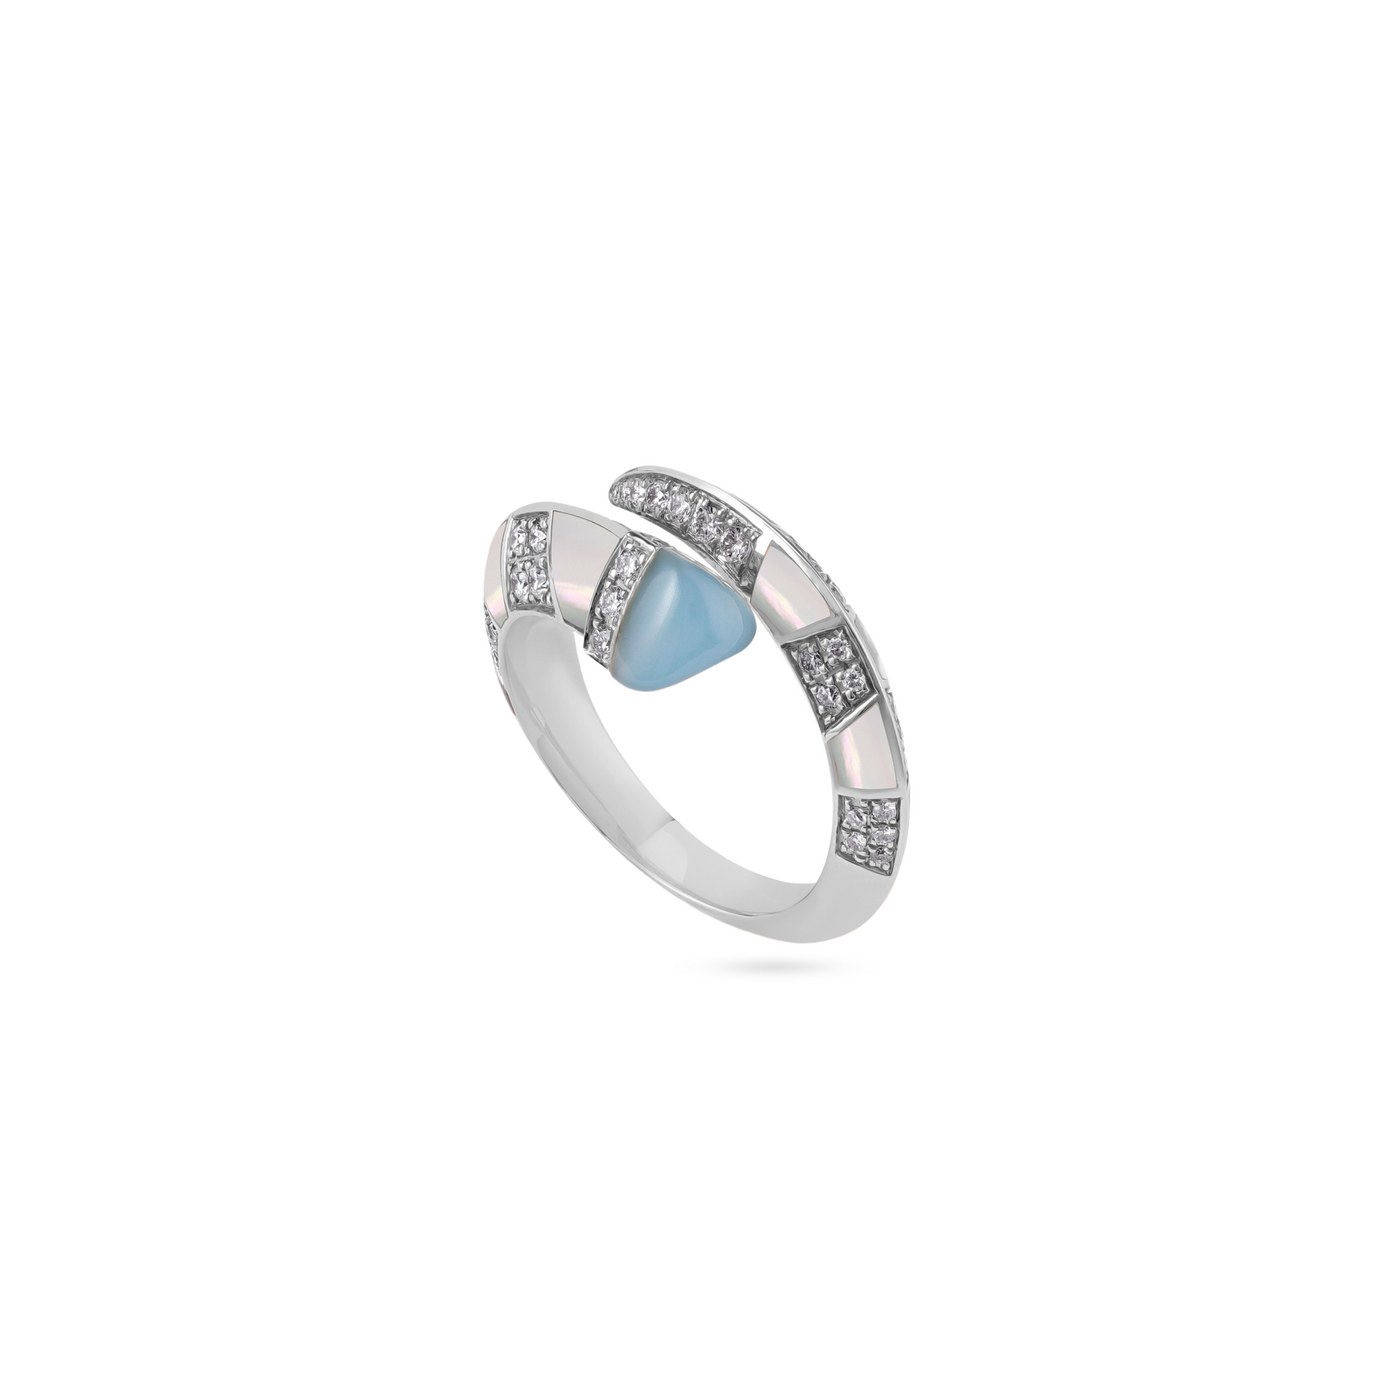 ARTISTRY White Gold Diamond Ring With Natural CHALCEDONY